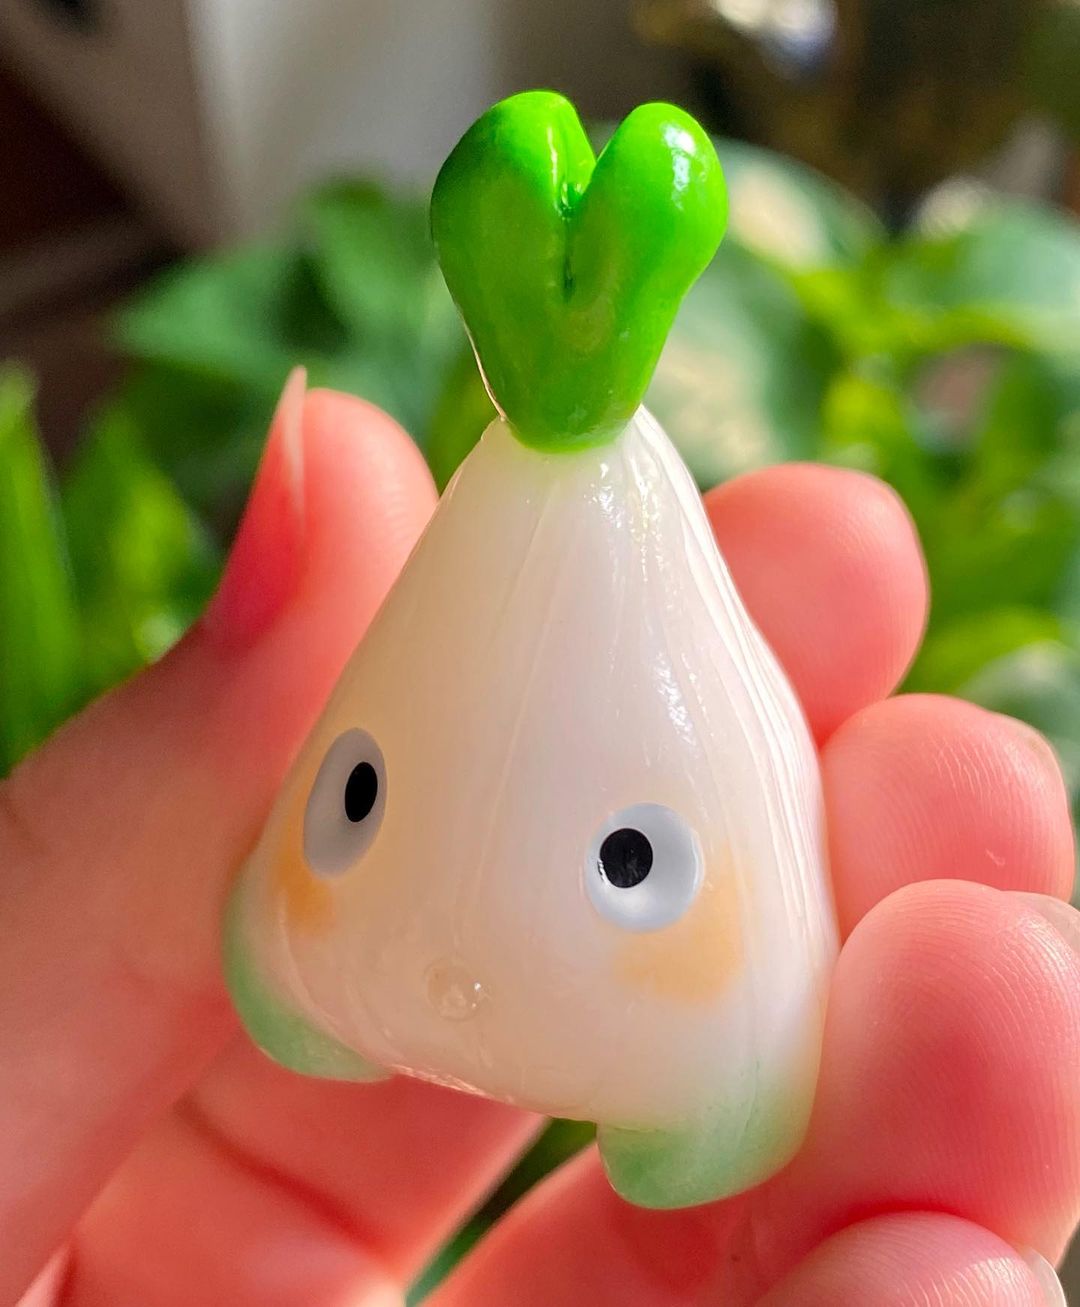 Garlic bulb glossy sculpture with eyes and blush